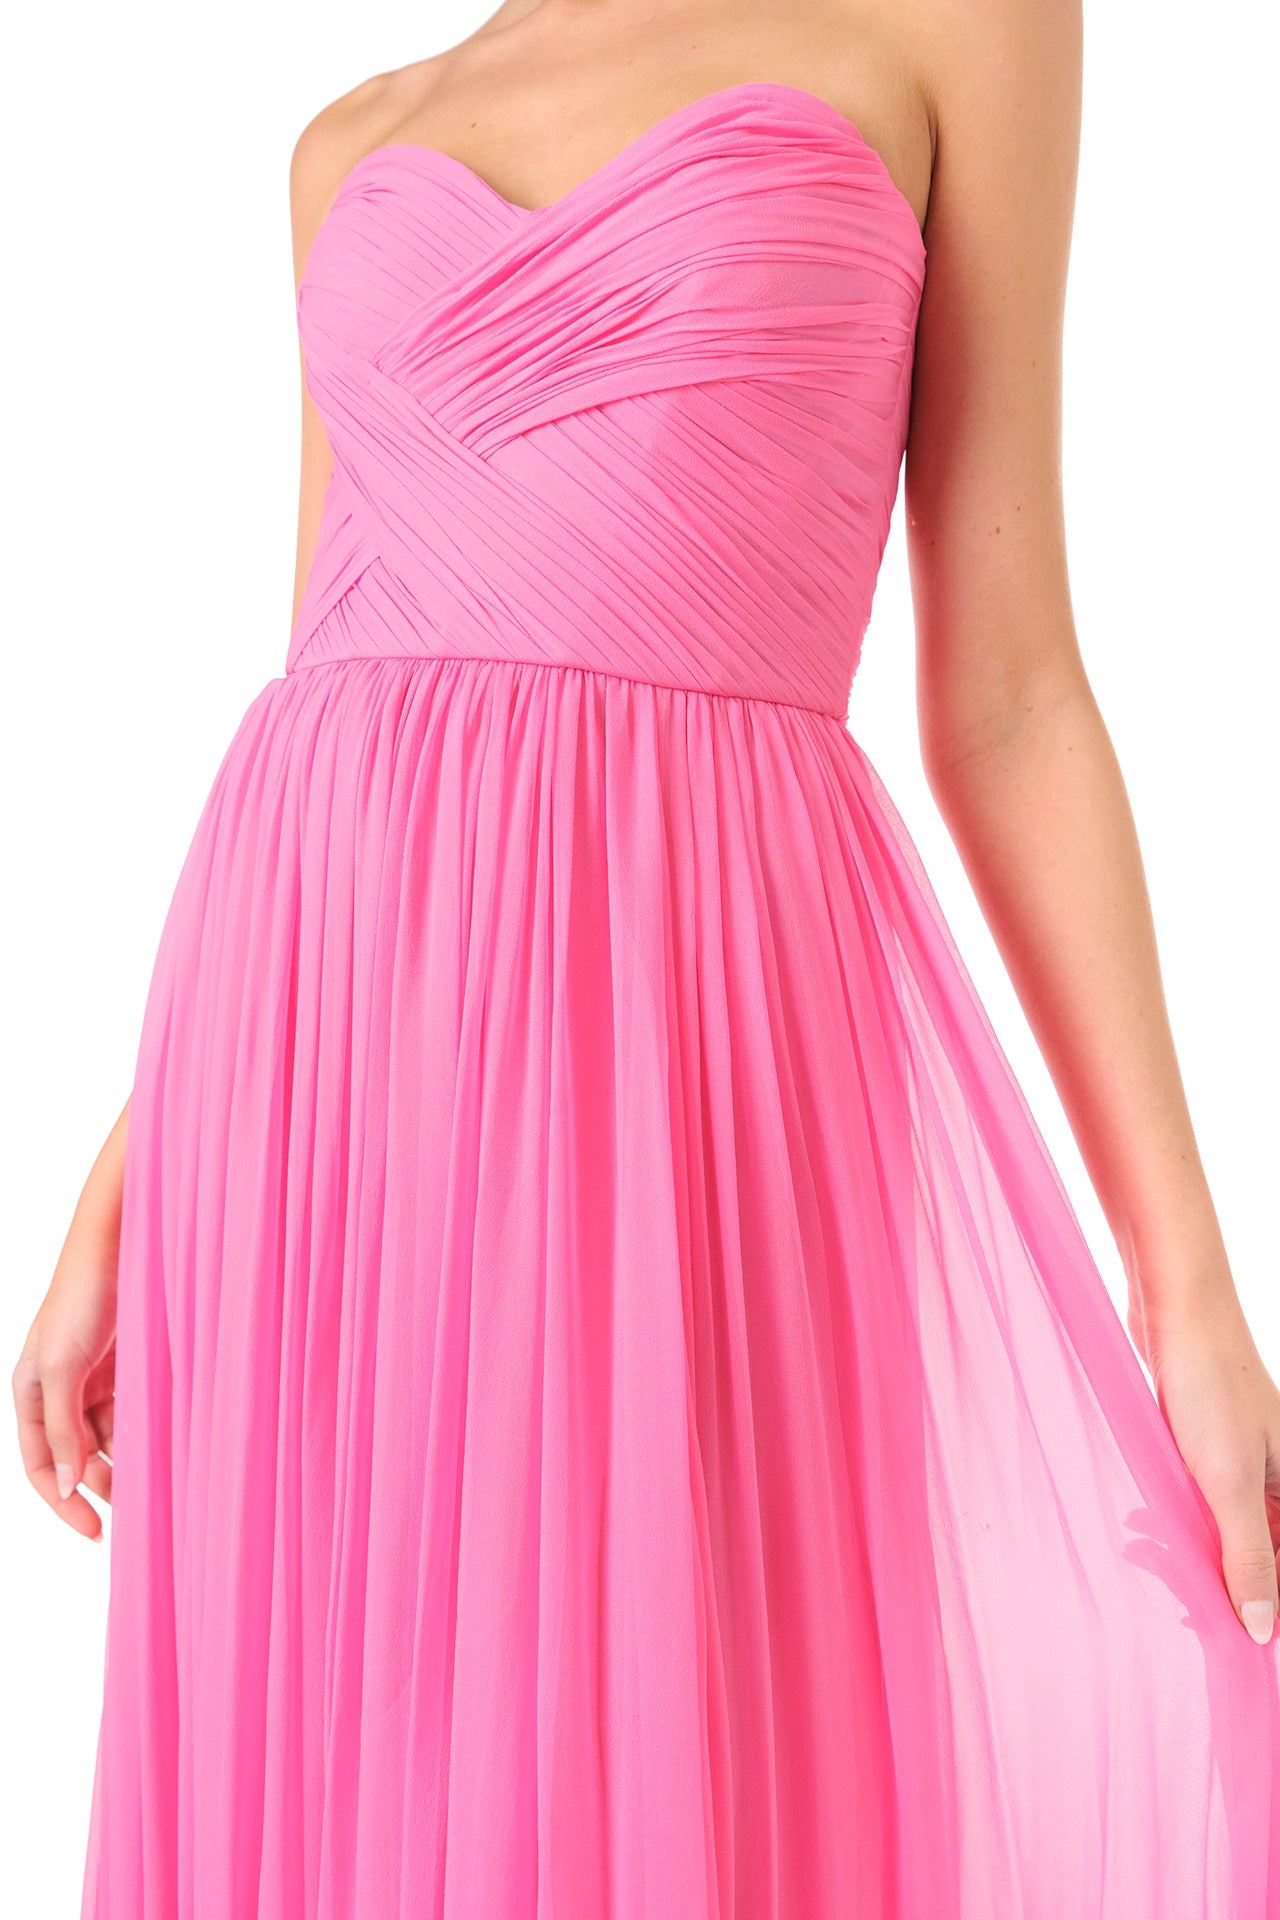 Monique Lhuillier Fall 2024 strapless pink chiffon gown with sweetheart neckline - detail.